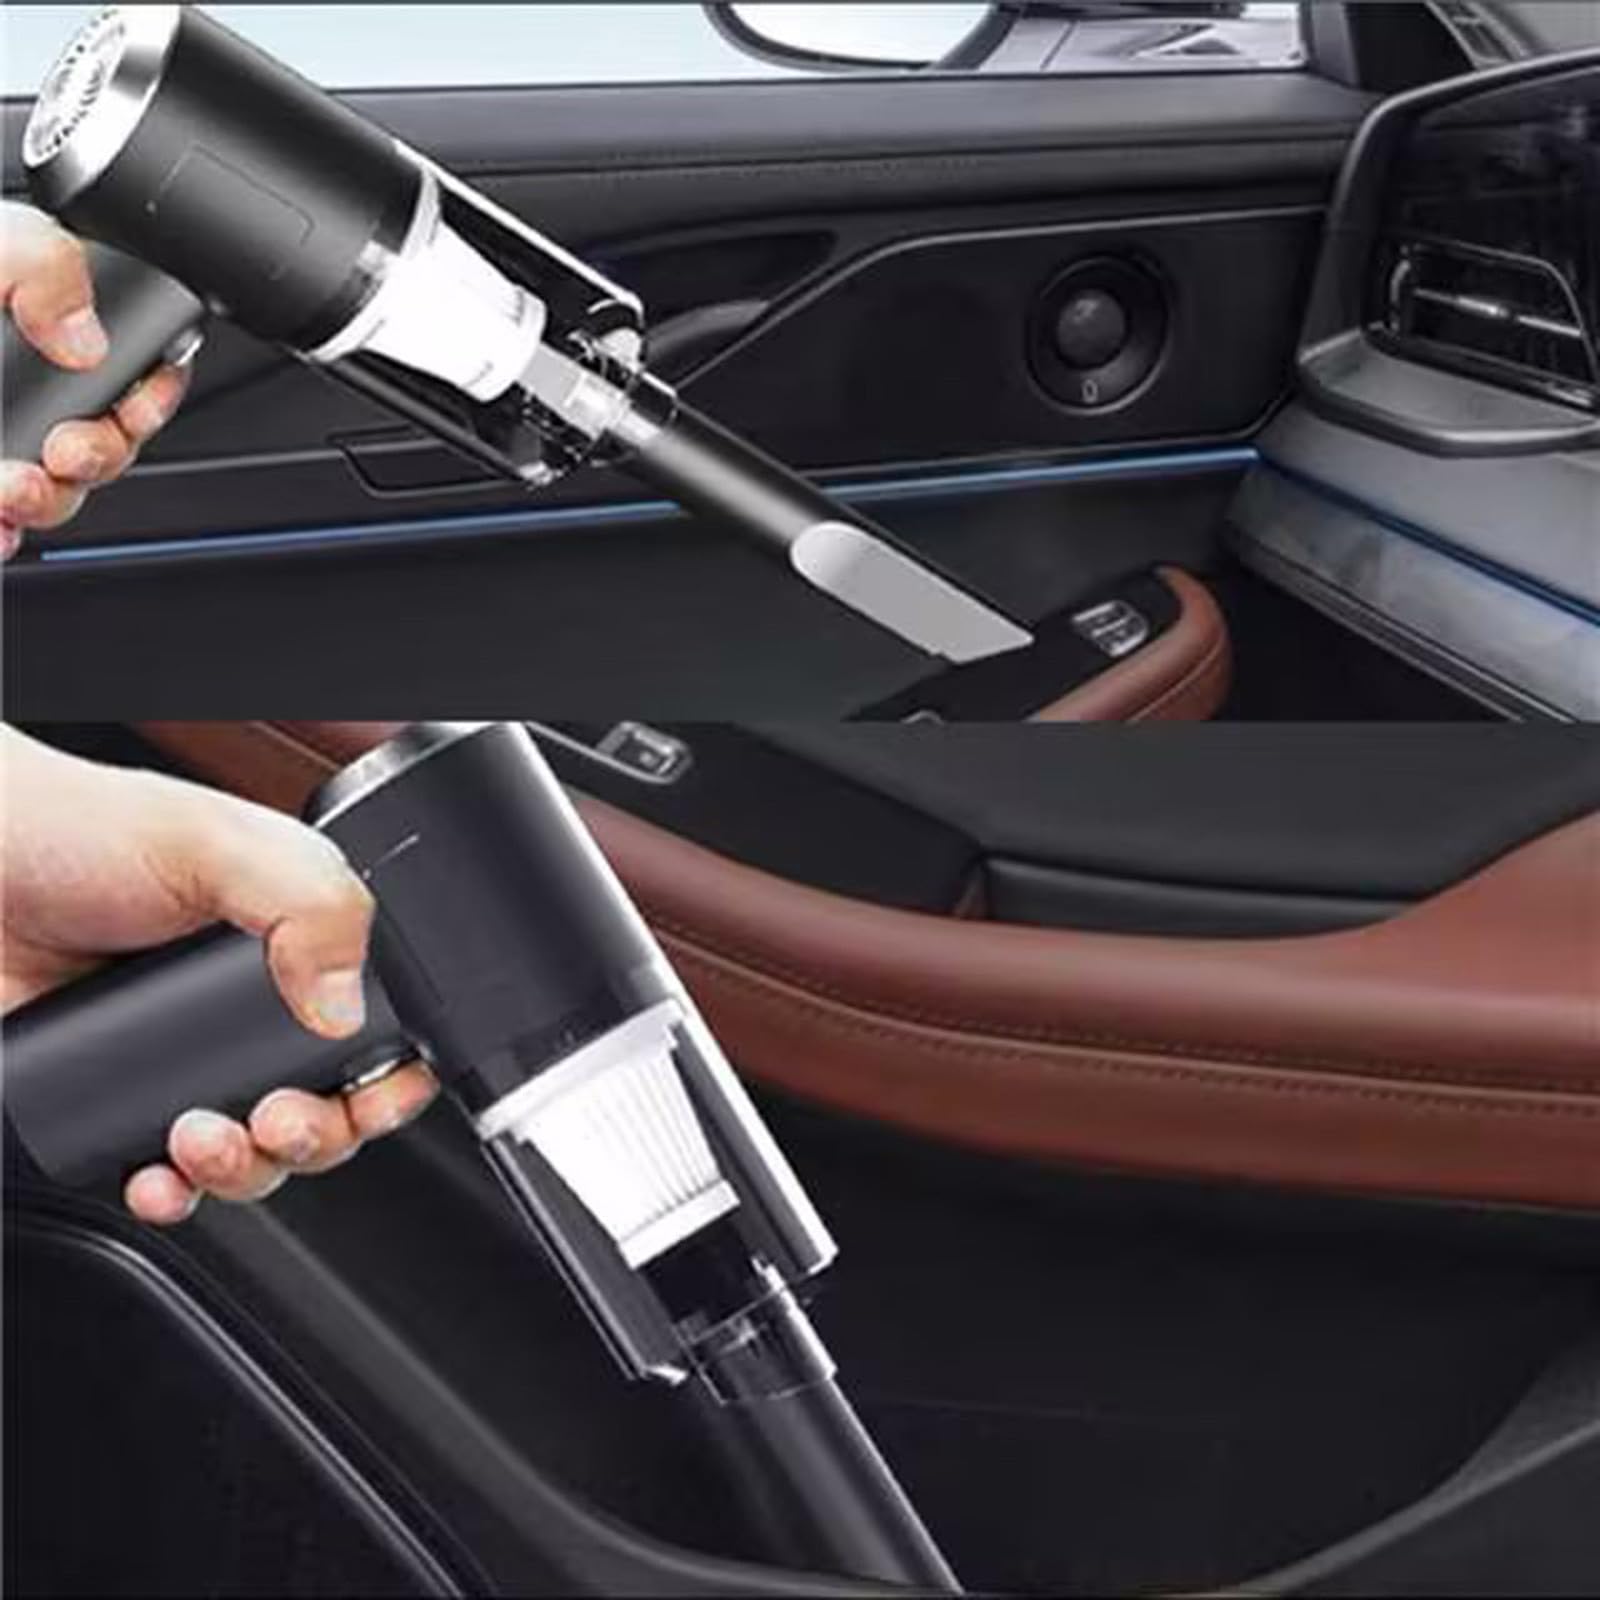 3 in 1 Wireless Handheld Car Vacuum Cleaner, 9000PA Powerful Suction Mini Portable Vacuum Cleaner, USB Cordless Handheld Car Vacuum Cleaner Rechargeable for Car, Home, Office